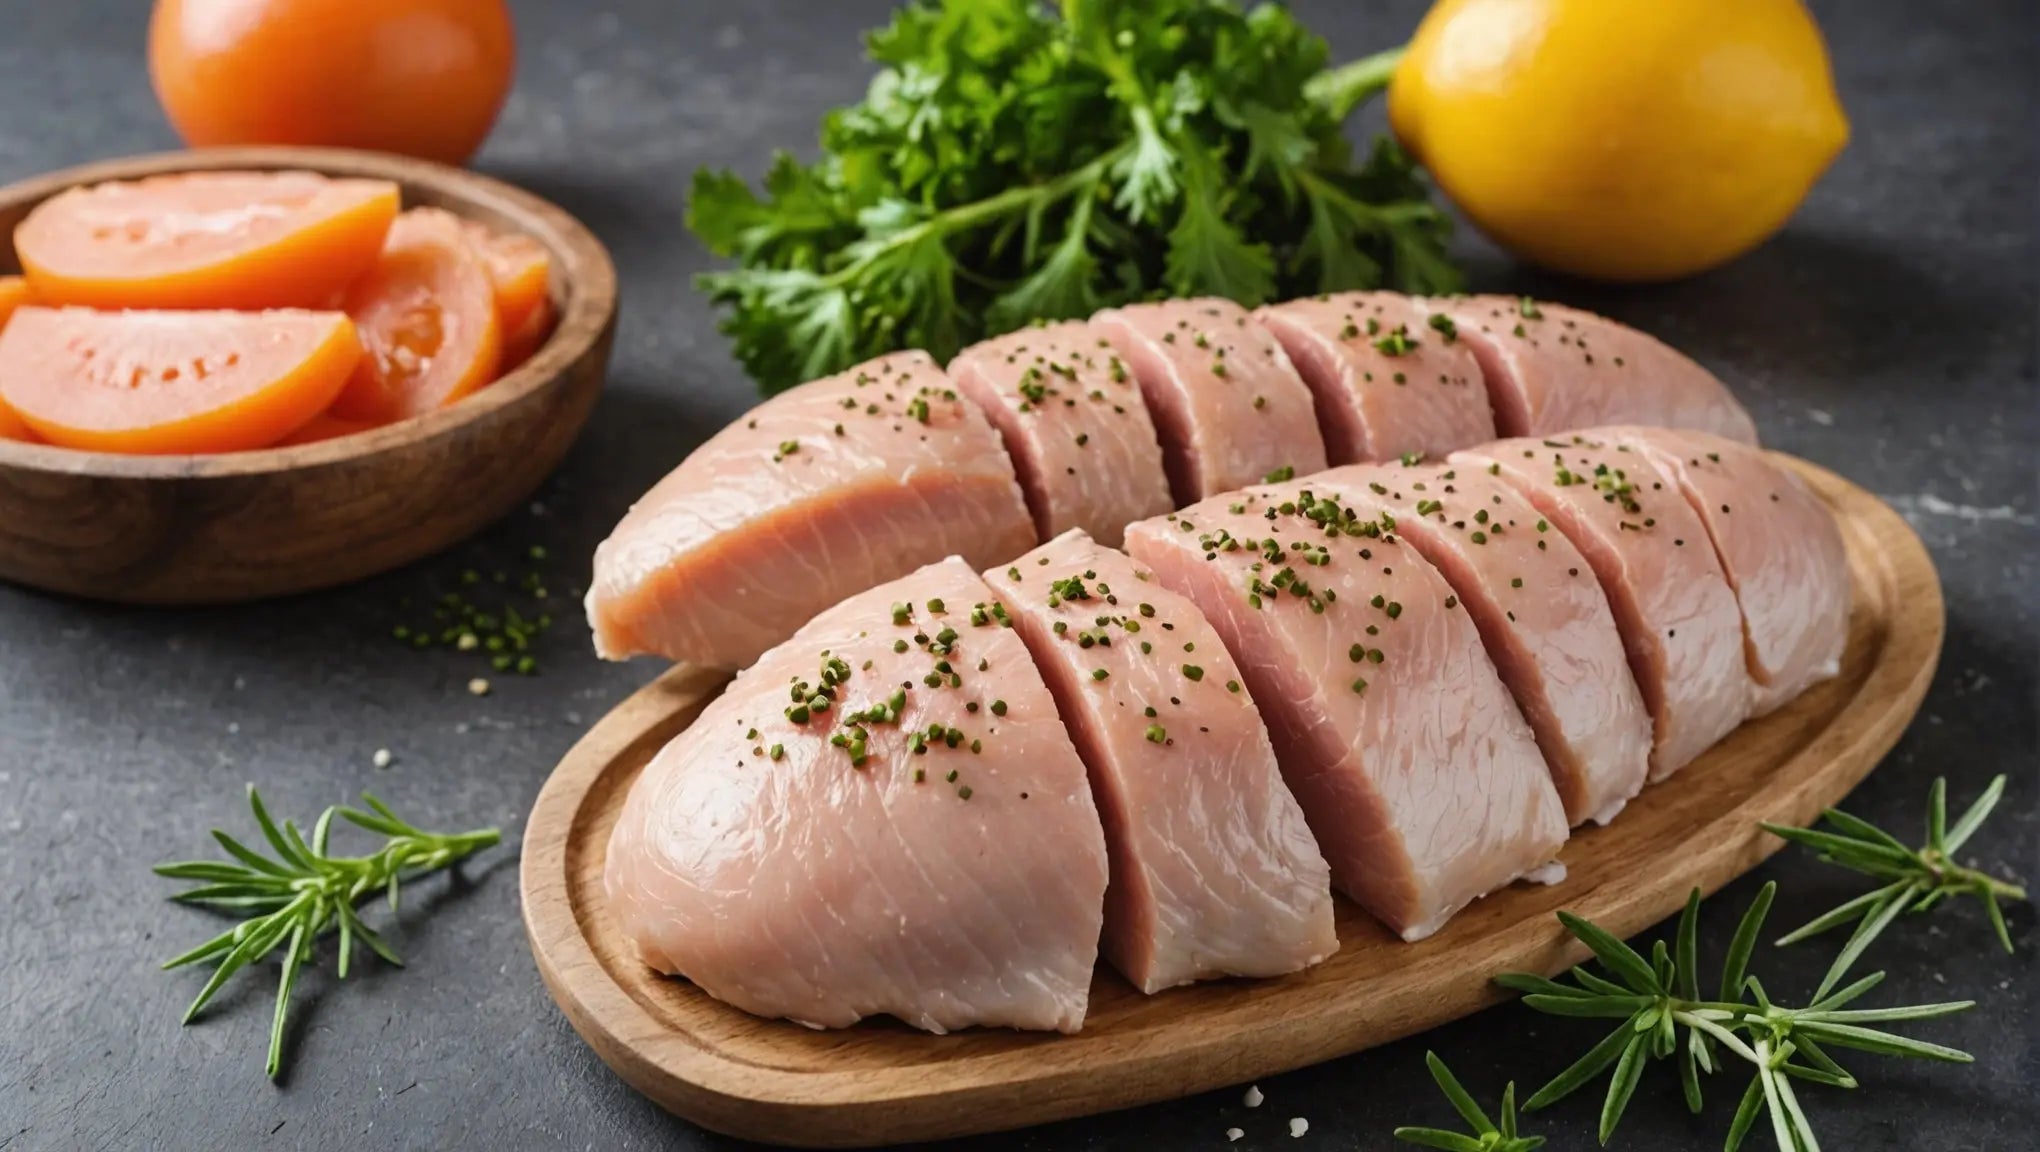 Raw Chicken Breast for Dogs - A Nutritious Option for Canine Health